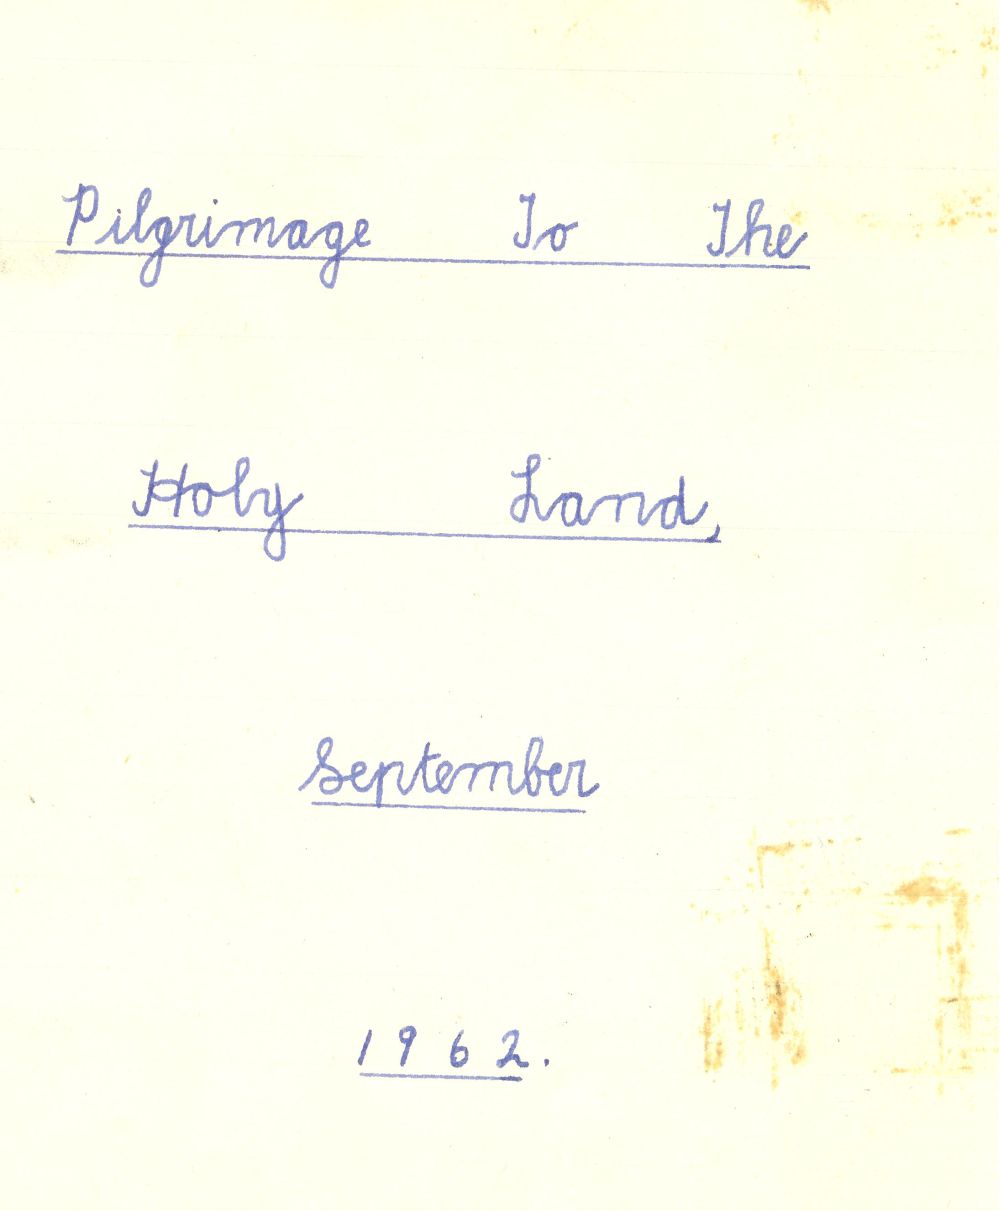 Title page from ‘Pilgrimage to the Holy Land, September 1962' compiled by Patricia H. Ledbetter, RCB Library Ms 605